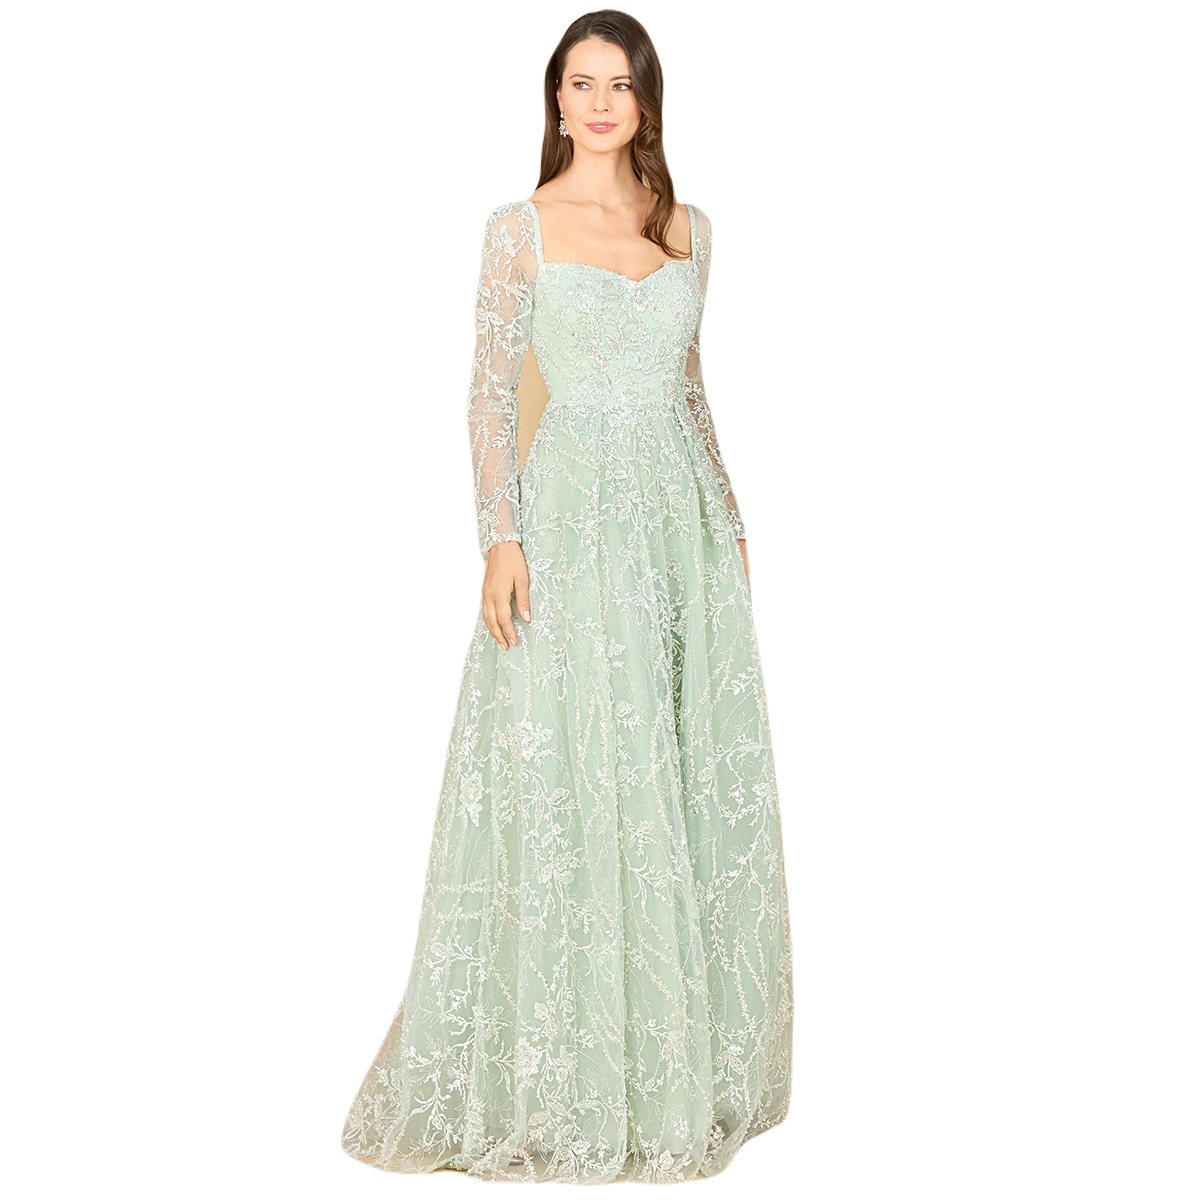 1950s Formal Dresses & Evening Gowns to Buy Lara Womens Long Sleeve Beaded Lace Gown - Dusty sage $858.00 AT vintagedancer.com